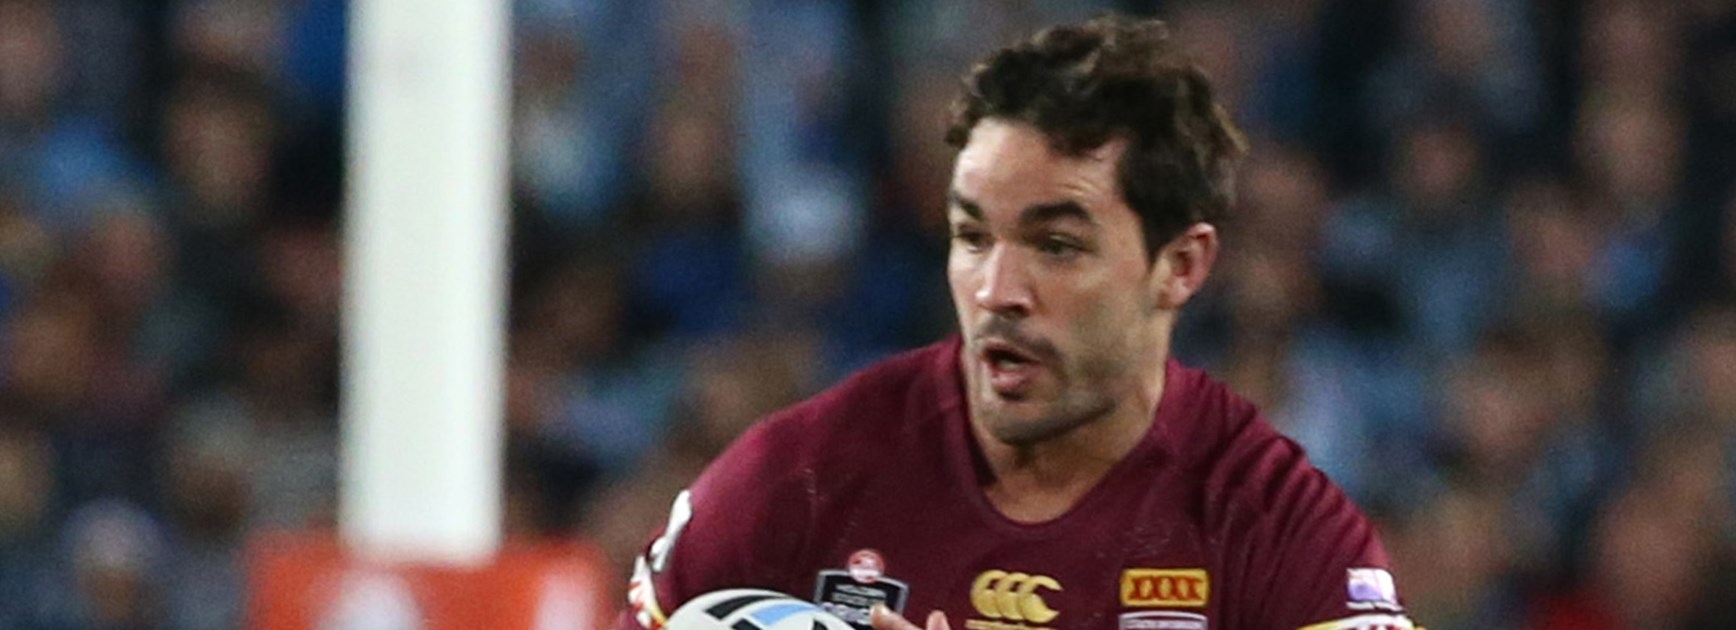 Queensland Maroons forward Aidan Guerra is ready to Kick Bowel Cancer by taking a simple 60-second online test.